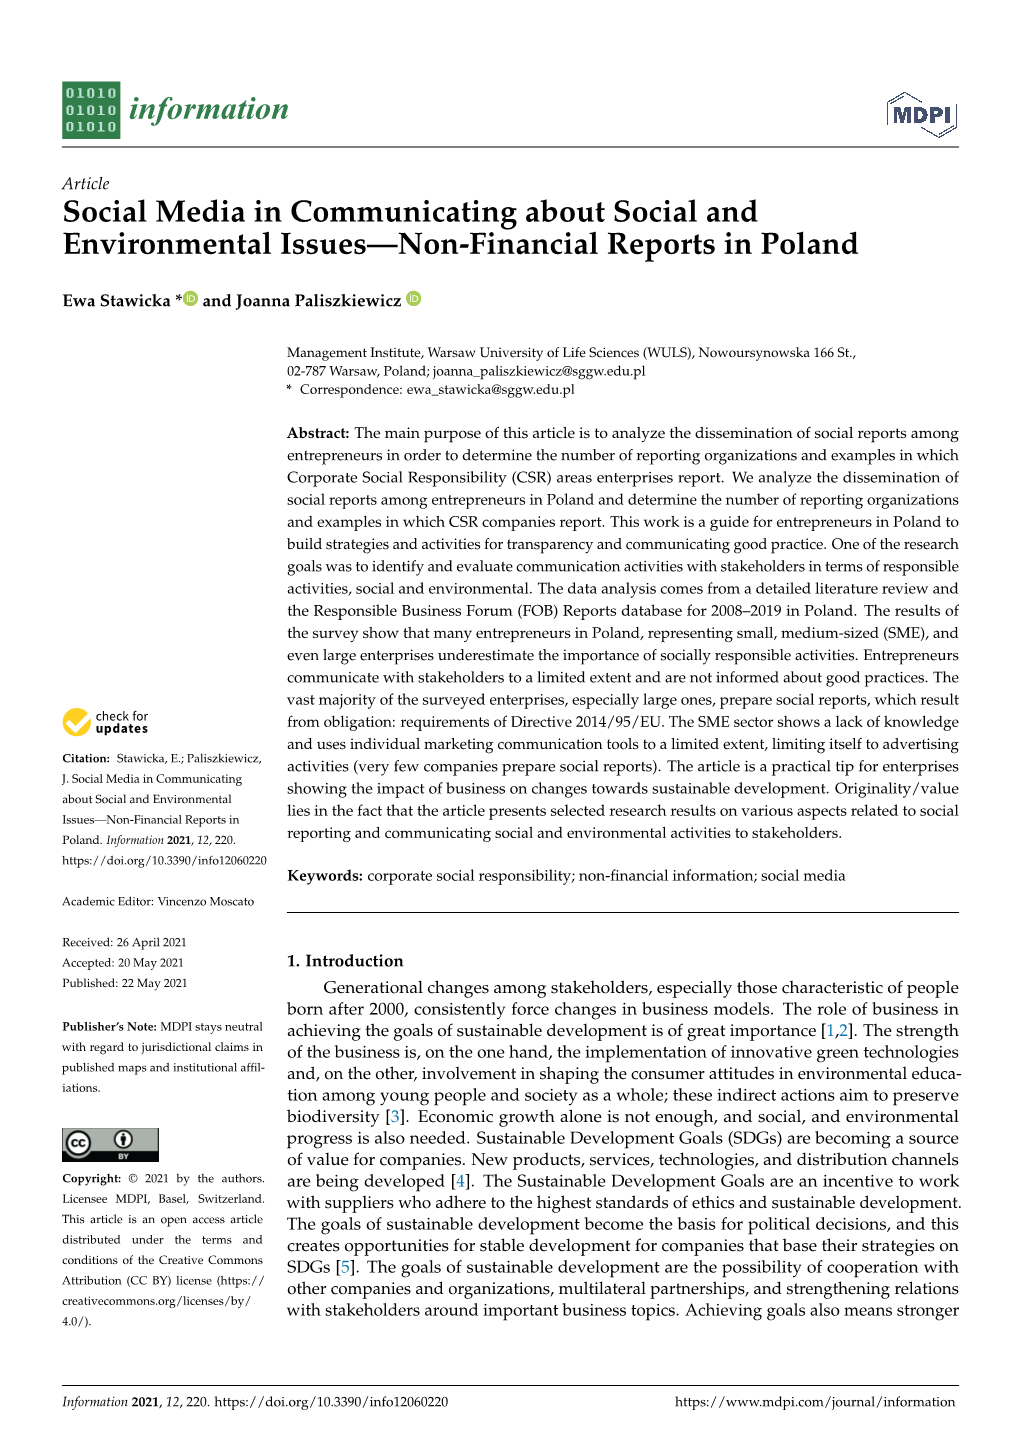 Social Media in Communicating About Social and Environmental Issues—Non-Financial Reports in Poland